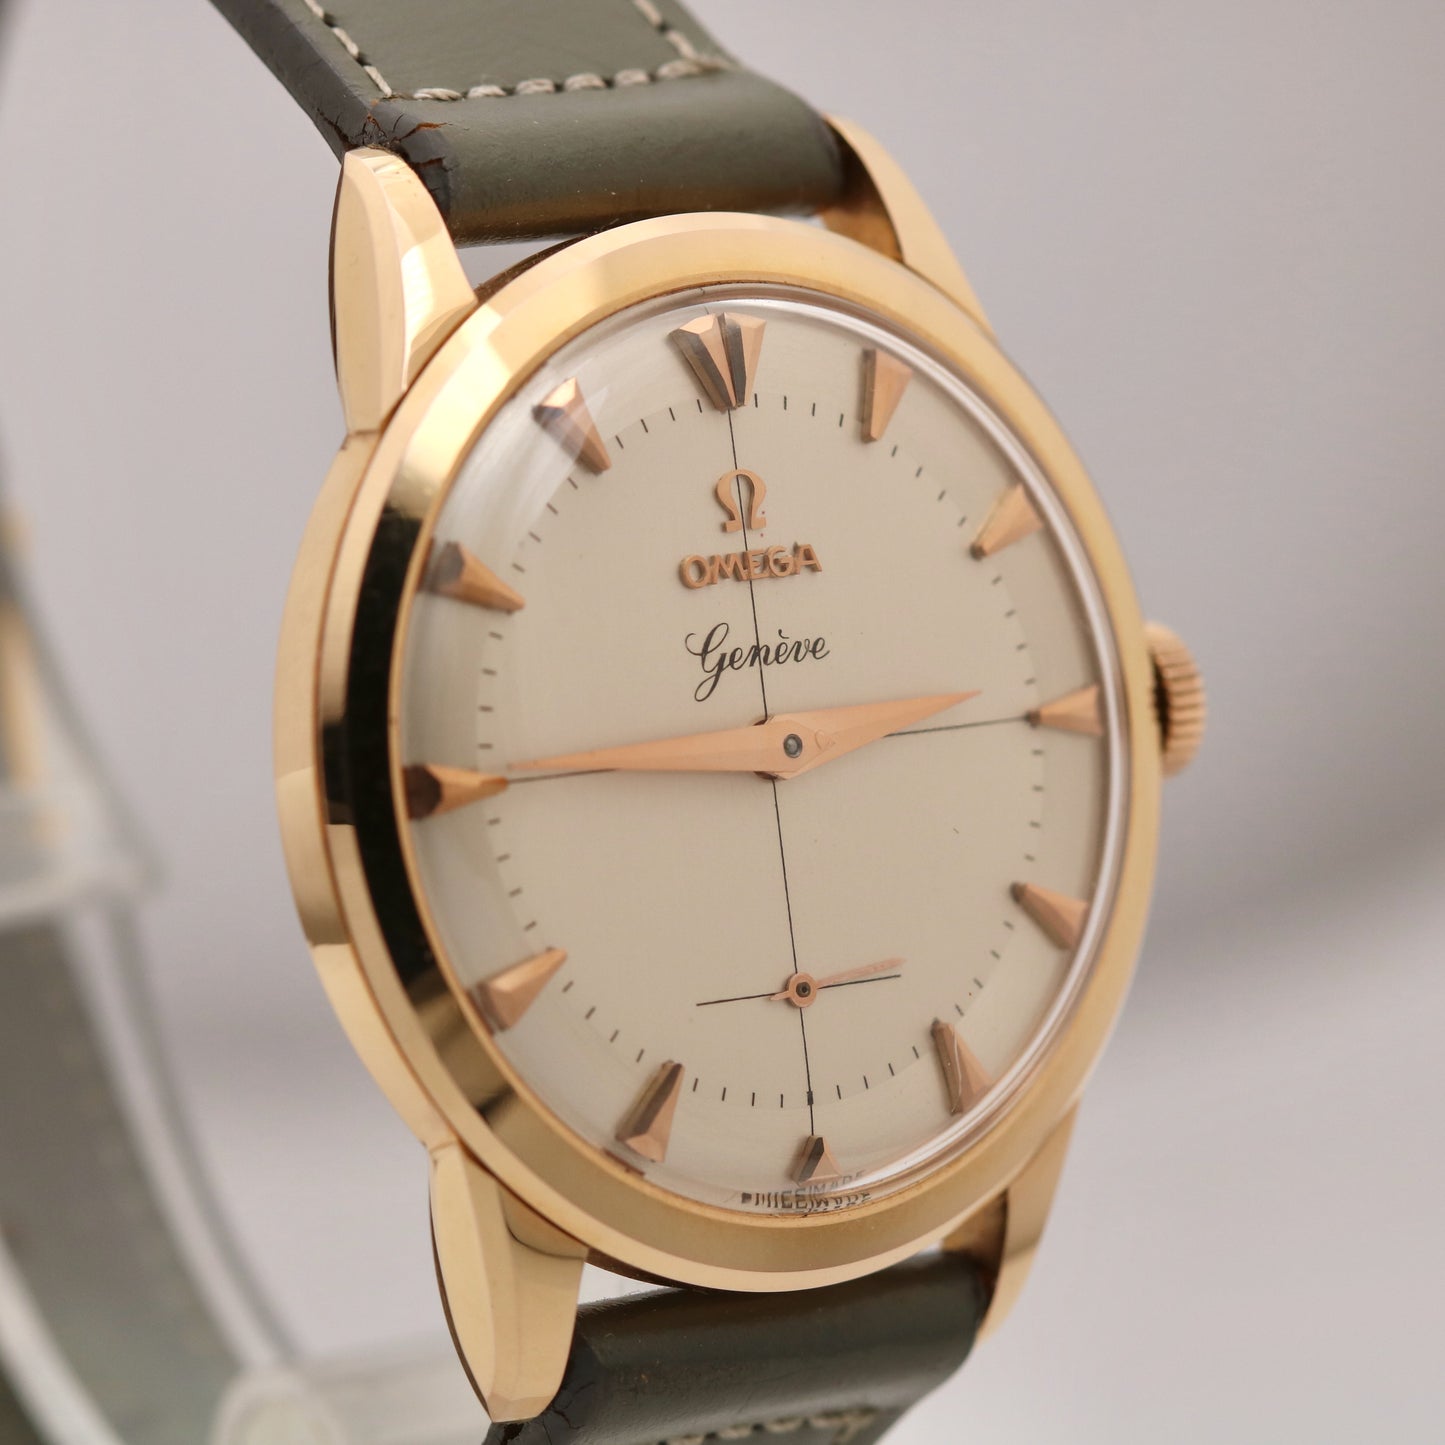 Unisex Omega Geneve 18K Rose Gold Silver Leather 35mm Manual 35mm Watch 2903